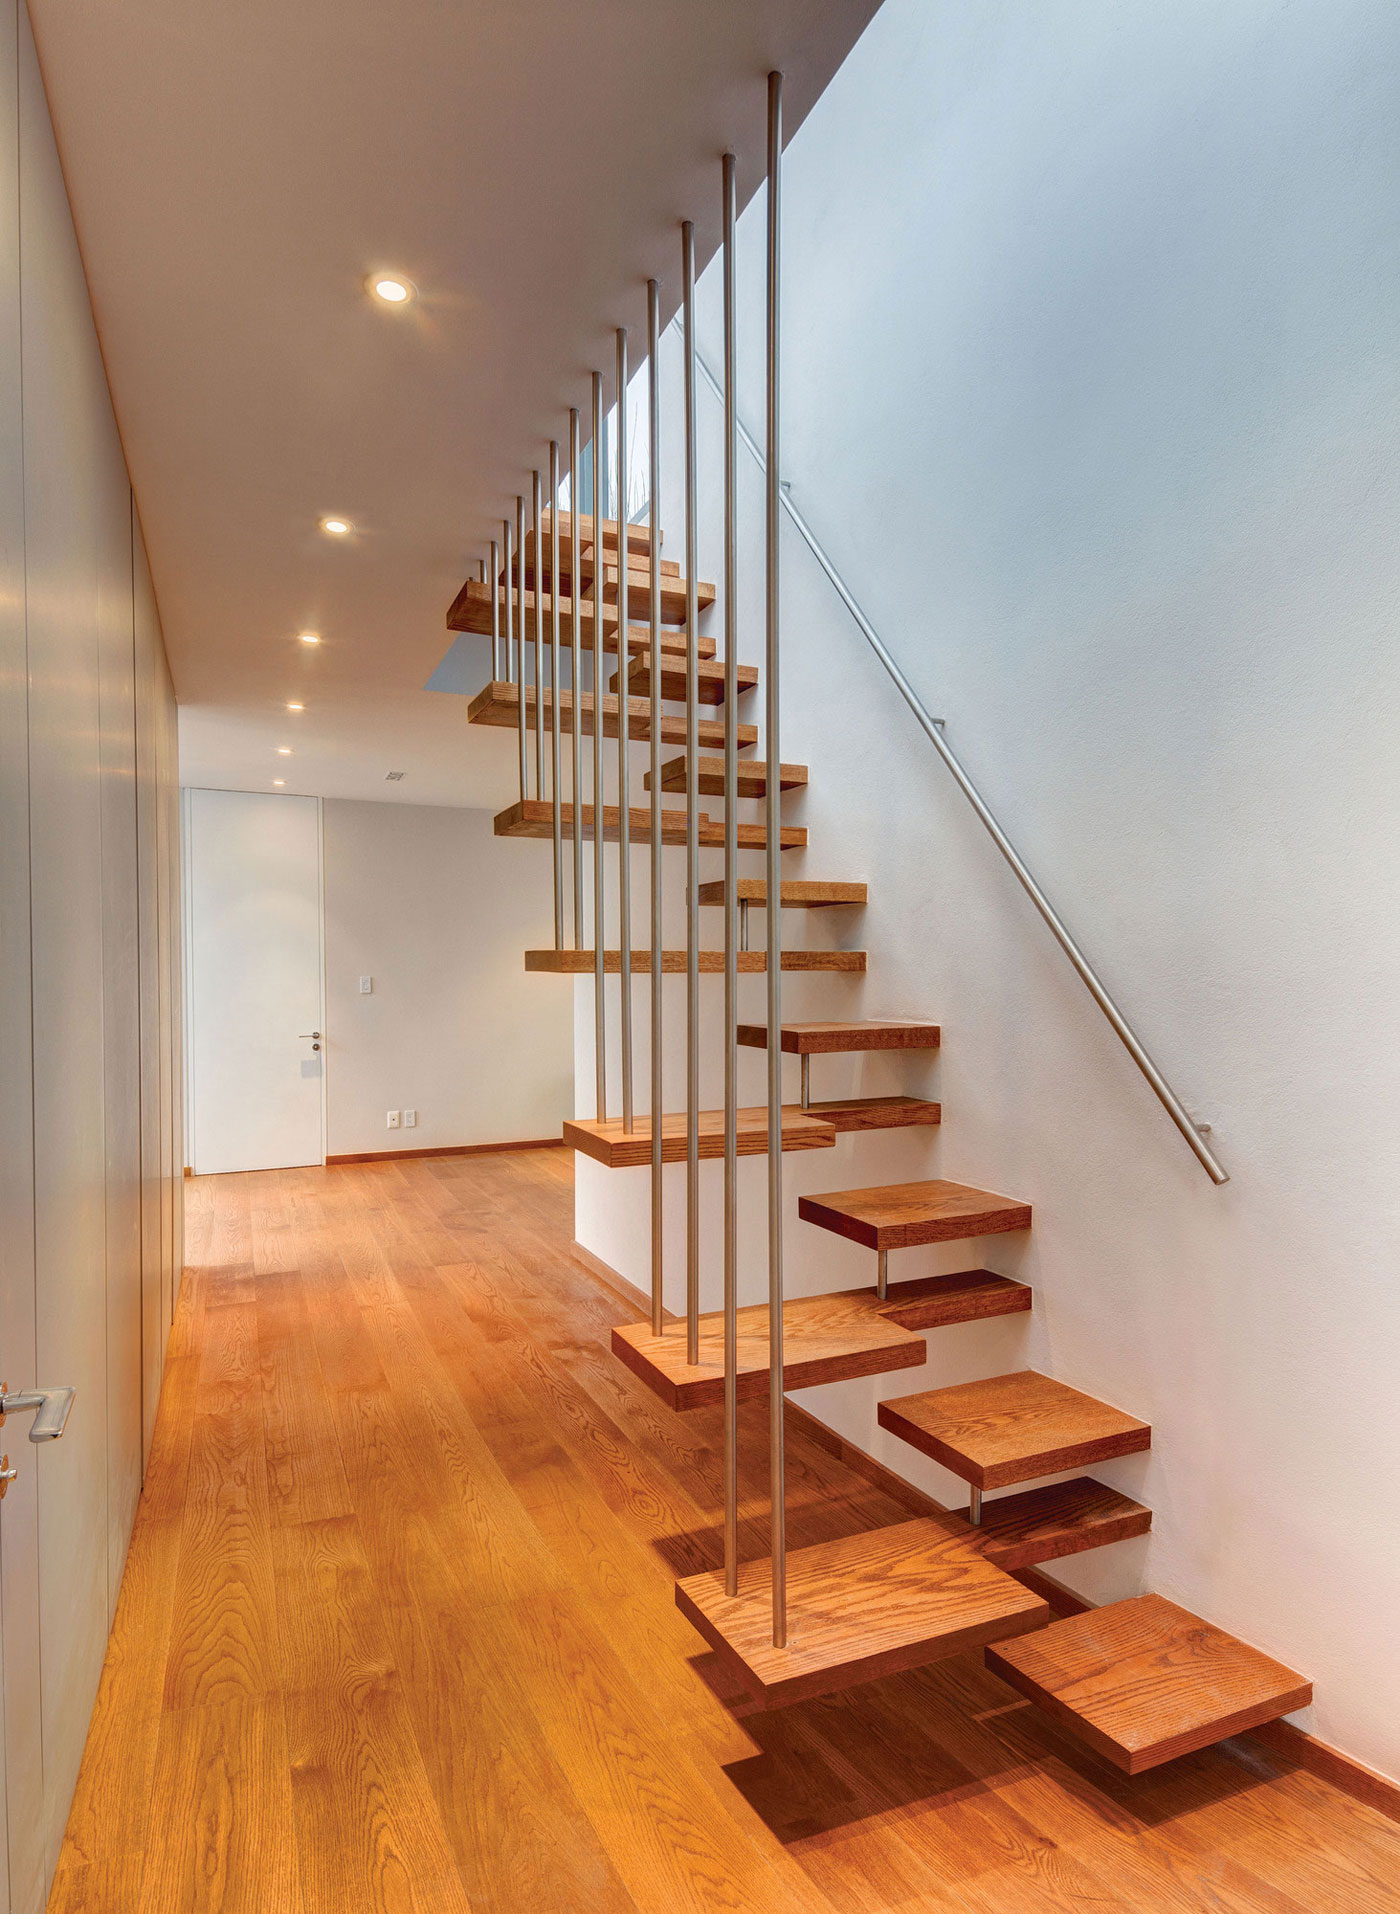 Unique And Creative Staircase Designs For Modern Homes Wooden ...